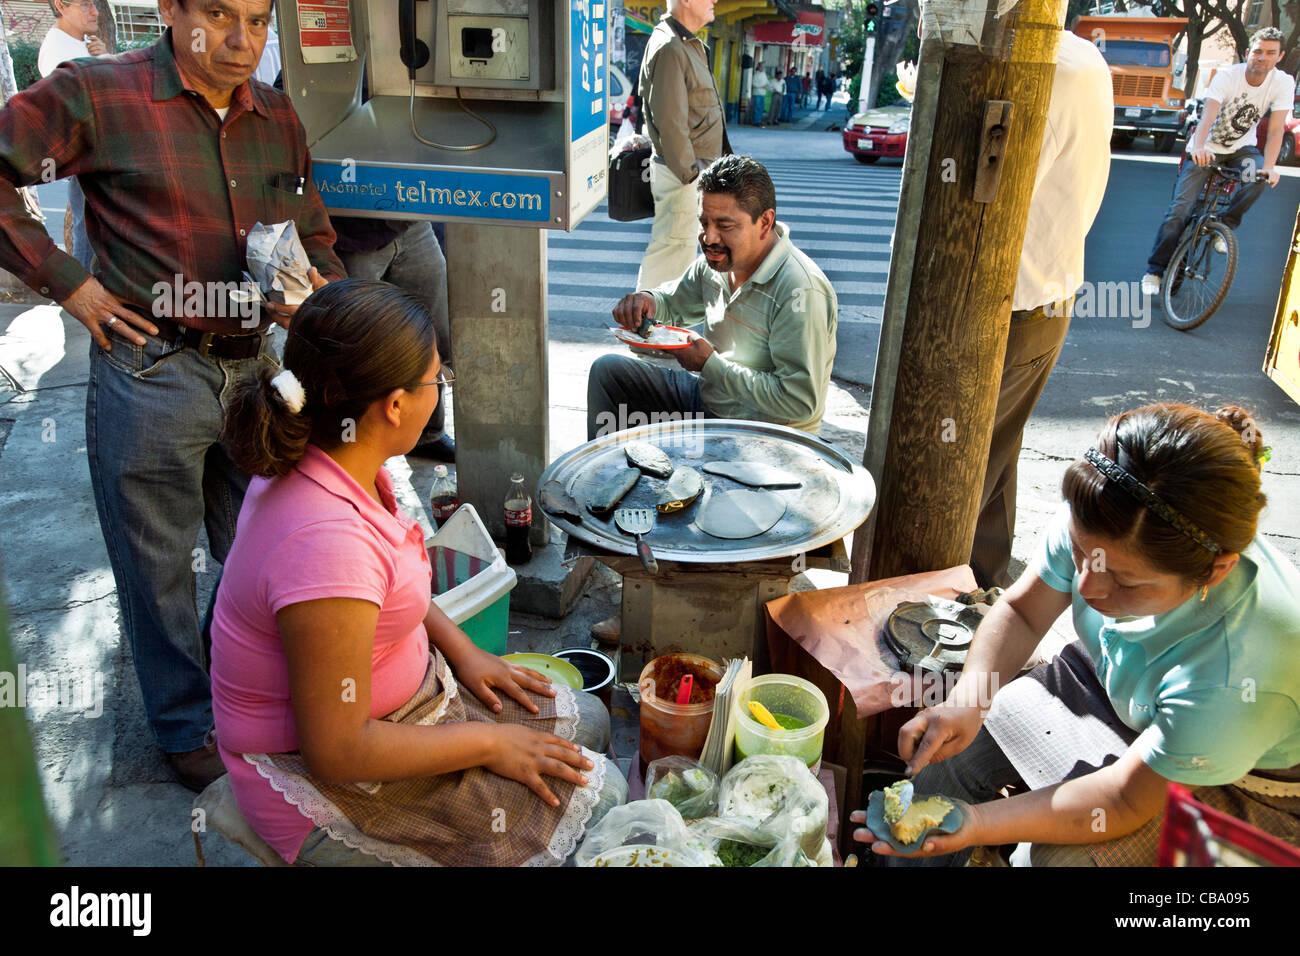 two women preparing blue corn tacos surrounded by happy customers eating on busy street corner Roma district Mexico City Stock Photo